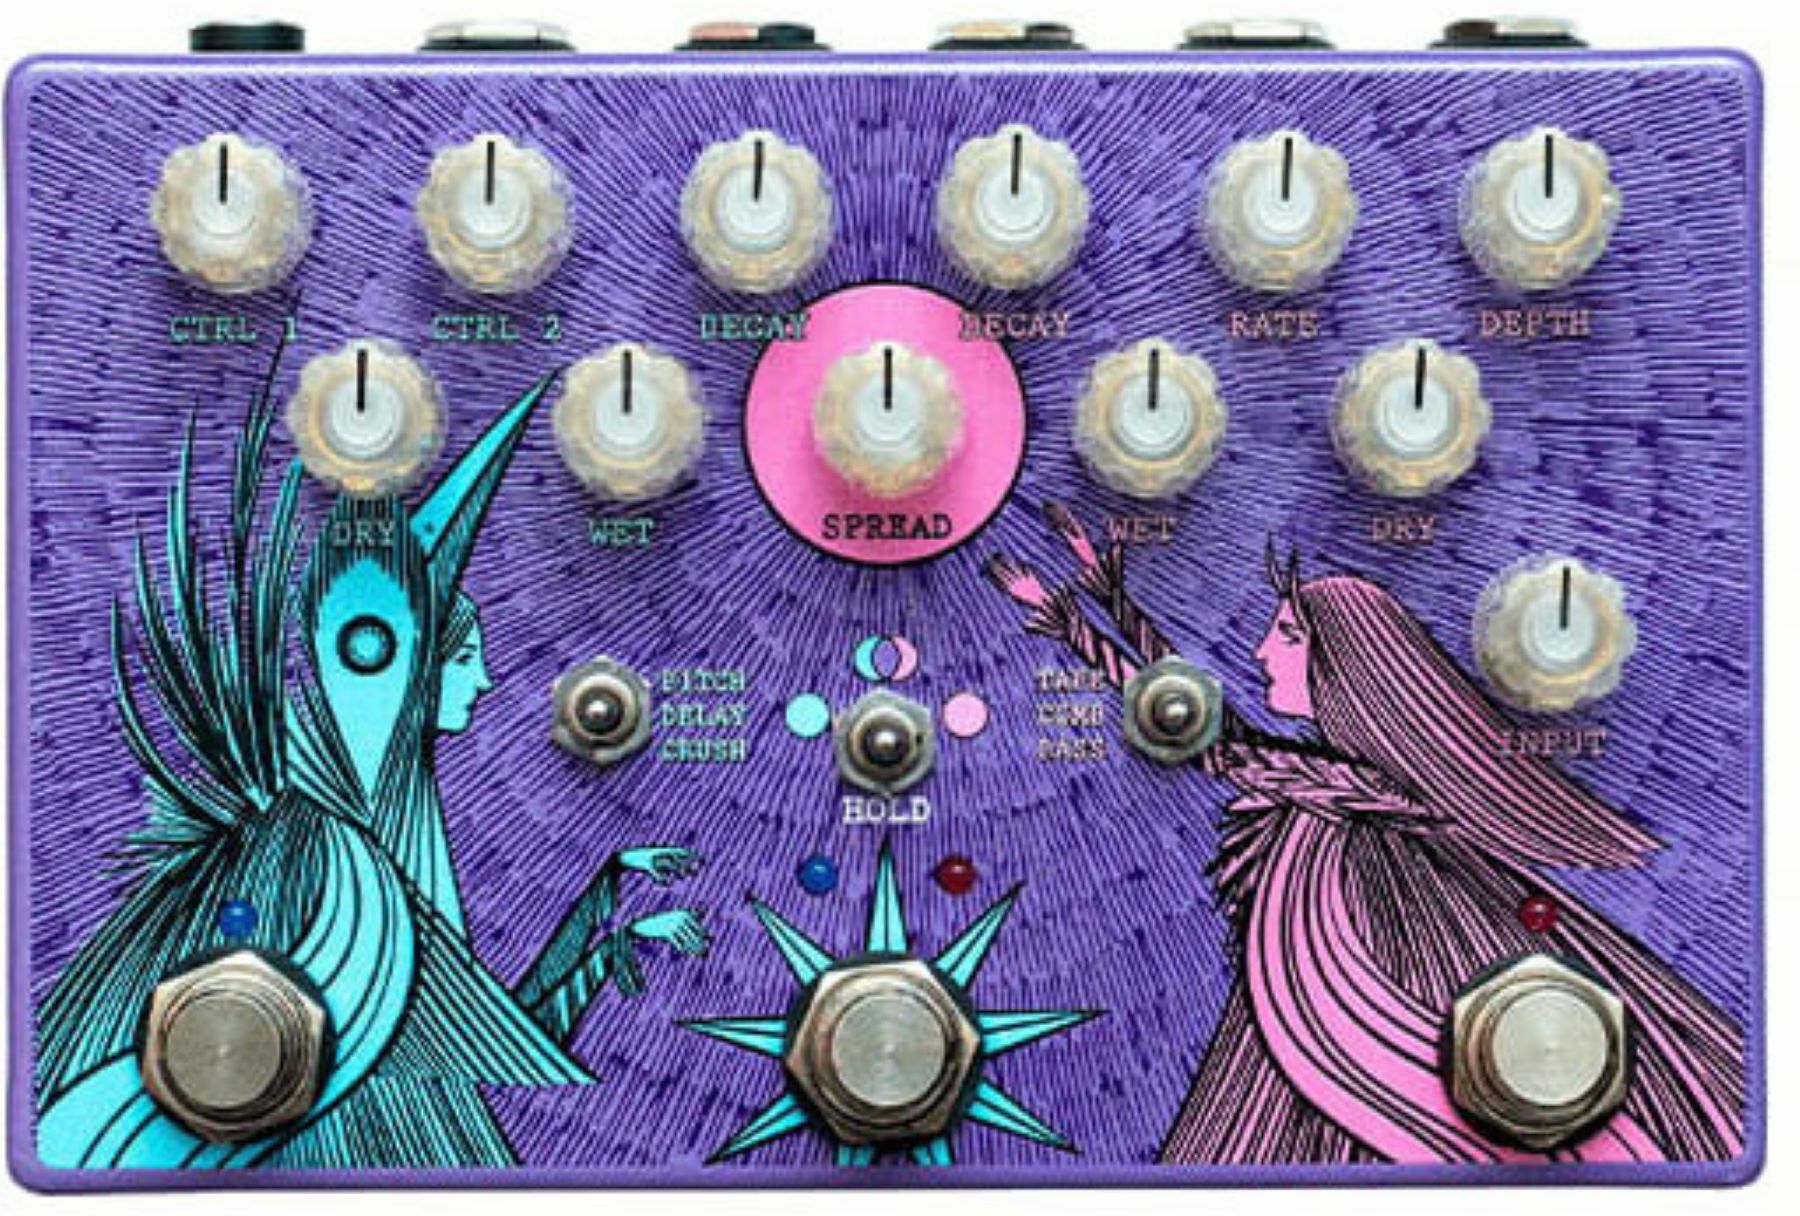 Old Blood Noise Dark Light Ltd Dual Reverb - Reverb/delay/echo effect pedaal - Main picture